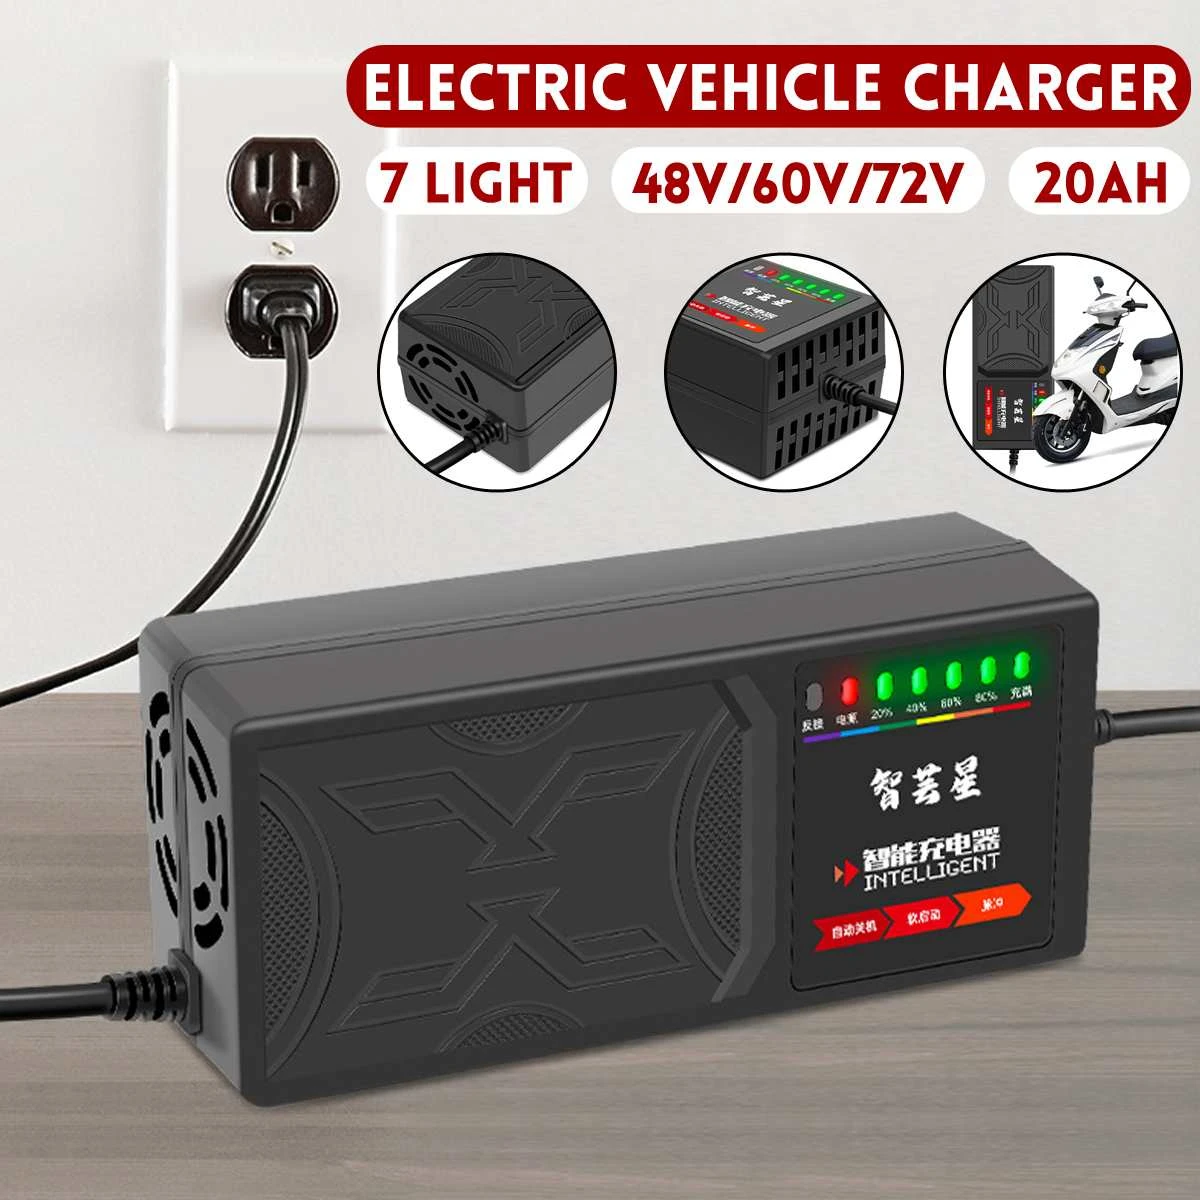 48V/60V/72V Electric vehicle charger With 7 light display power display current protection/ leakage protection/full pulse